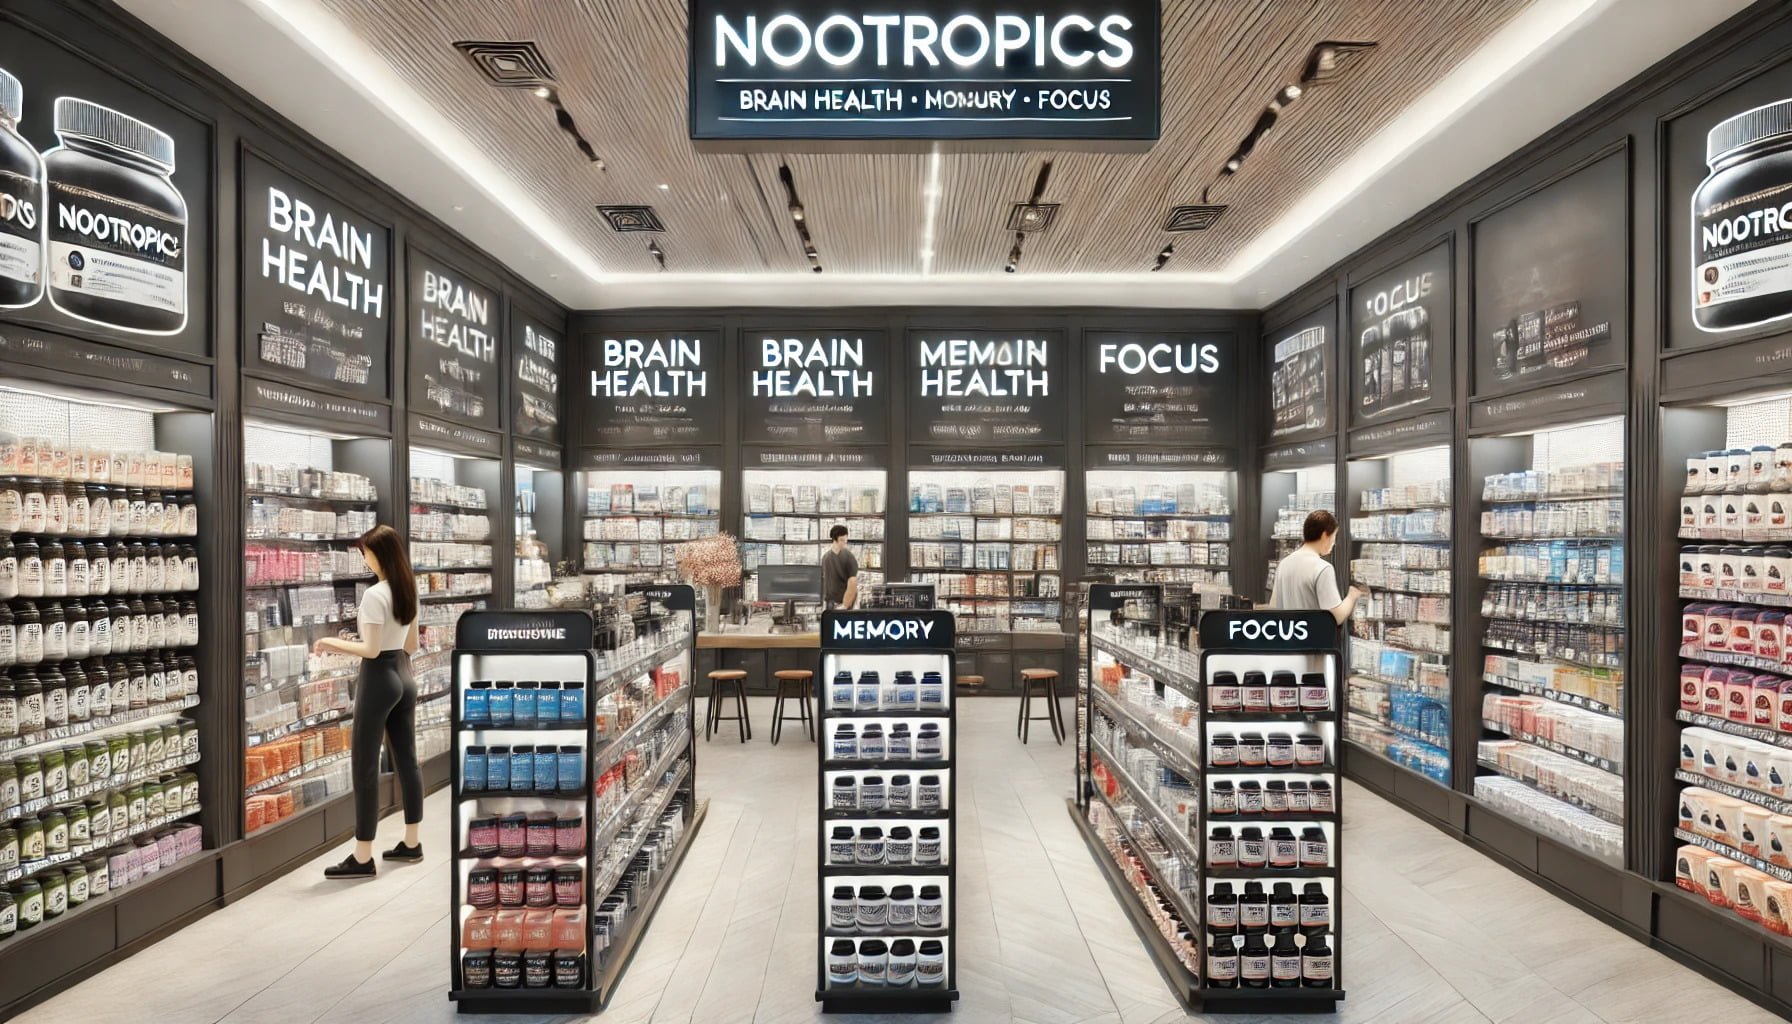 A photorealistic image of a nootropics store